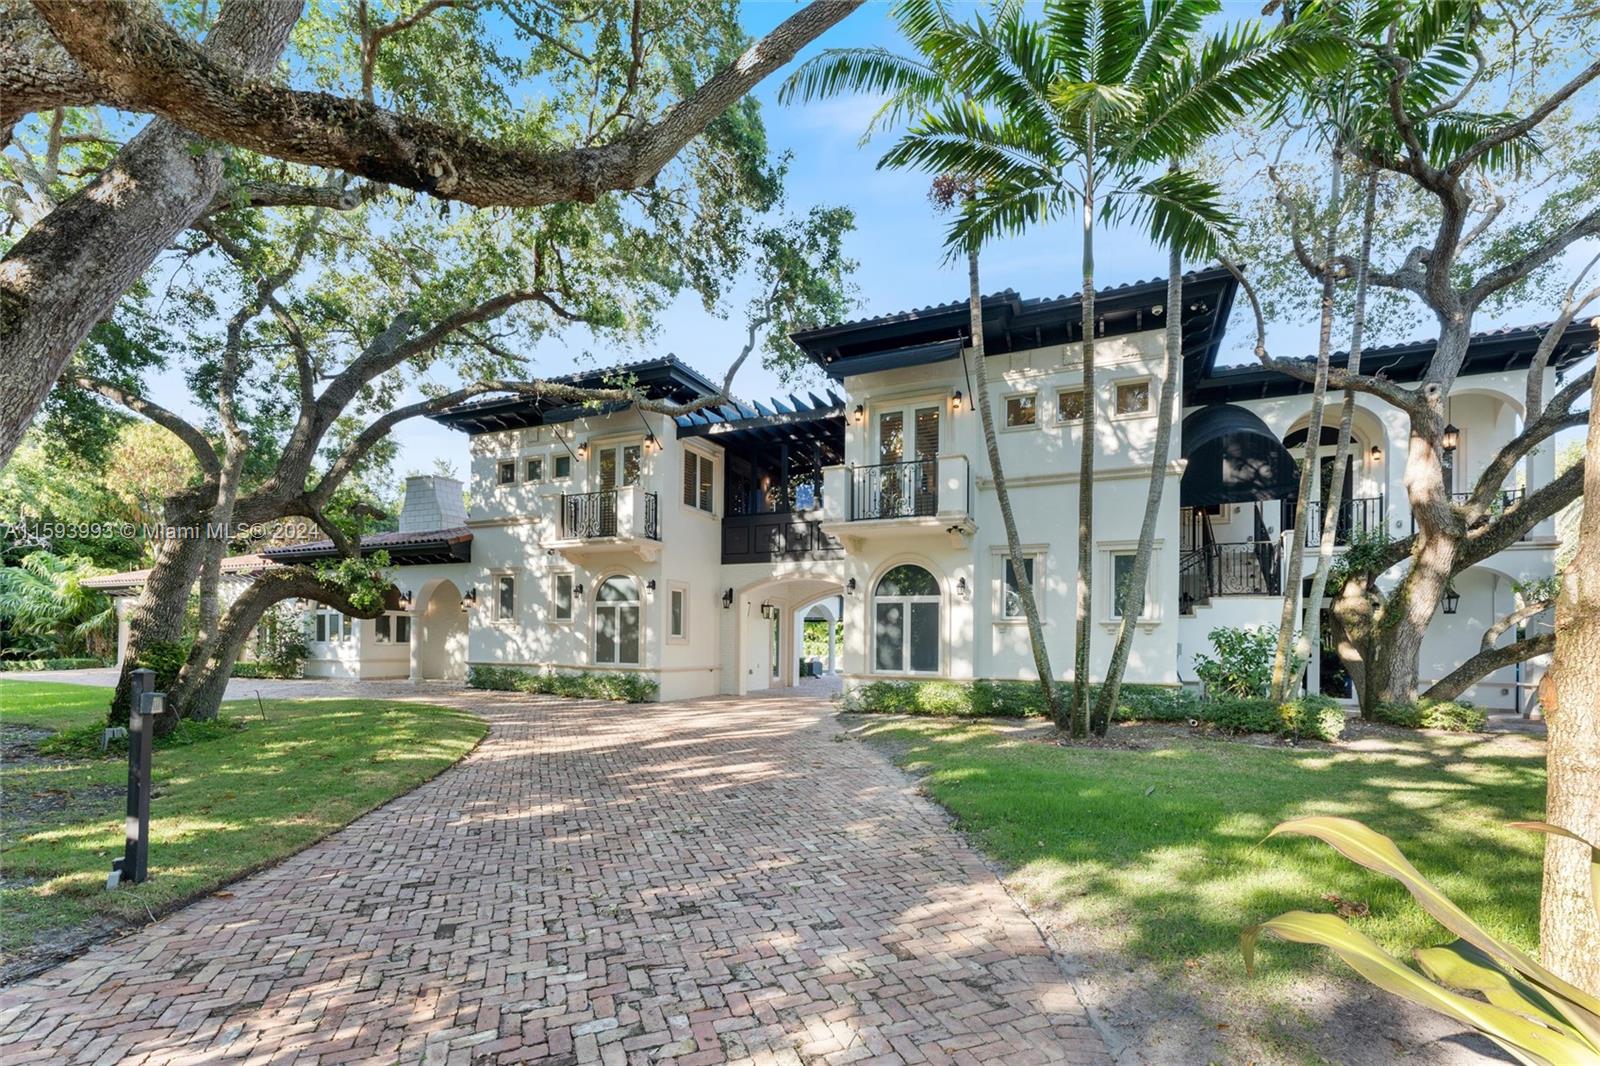 Spectacular, Vizcaya-style Pinecrest Estate commands a lushly planted builder’s acre on a quiet, tree-lined street. Flowing, sunlit interiors are simple, elegant, timeless; innovative layout ideal for entertaining. No-expense-spared materials, updates & artisan craftsmanship thruout. Sophisticated living area w/pop-out dining nook. Expansive, marble-appointed, eat-in chef’s kitchen w/Wolf, Sub-Zero & Miele appliances + adjacent laundry/pantry. 4 ensuite bdrms (2 primary: 1 poolside, 1 treetop). Outrageous entertainment suite w/glass floor, mega screen, wet bar, fireplace & more crowns the 4-car garage below. Exterior: pickleball/b-ball court w/stadium lighting, lge pool, grandly scaled covered terrace/summer kitchen & big bar. Live & recreate luxuriously in this unique, MUST-SEE residence!